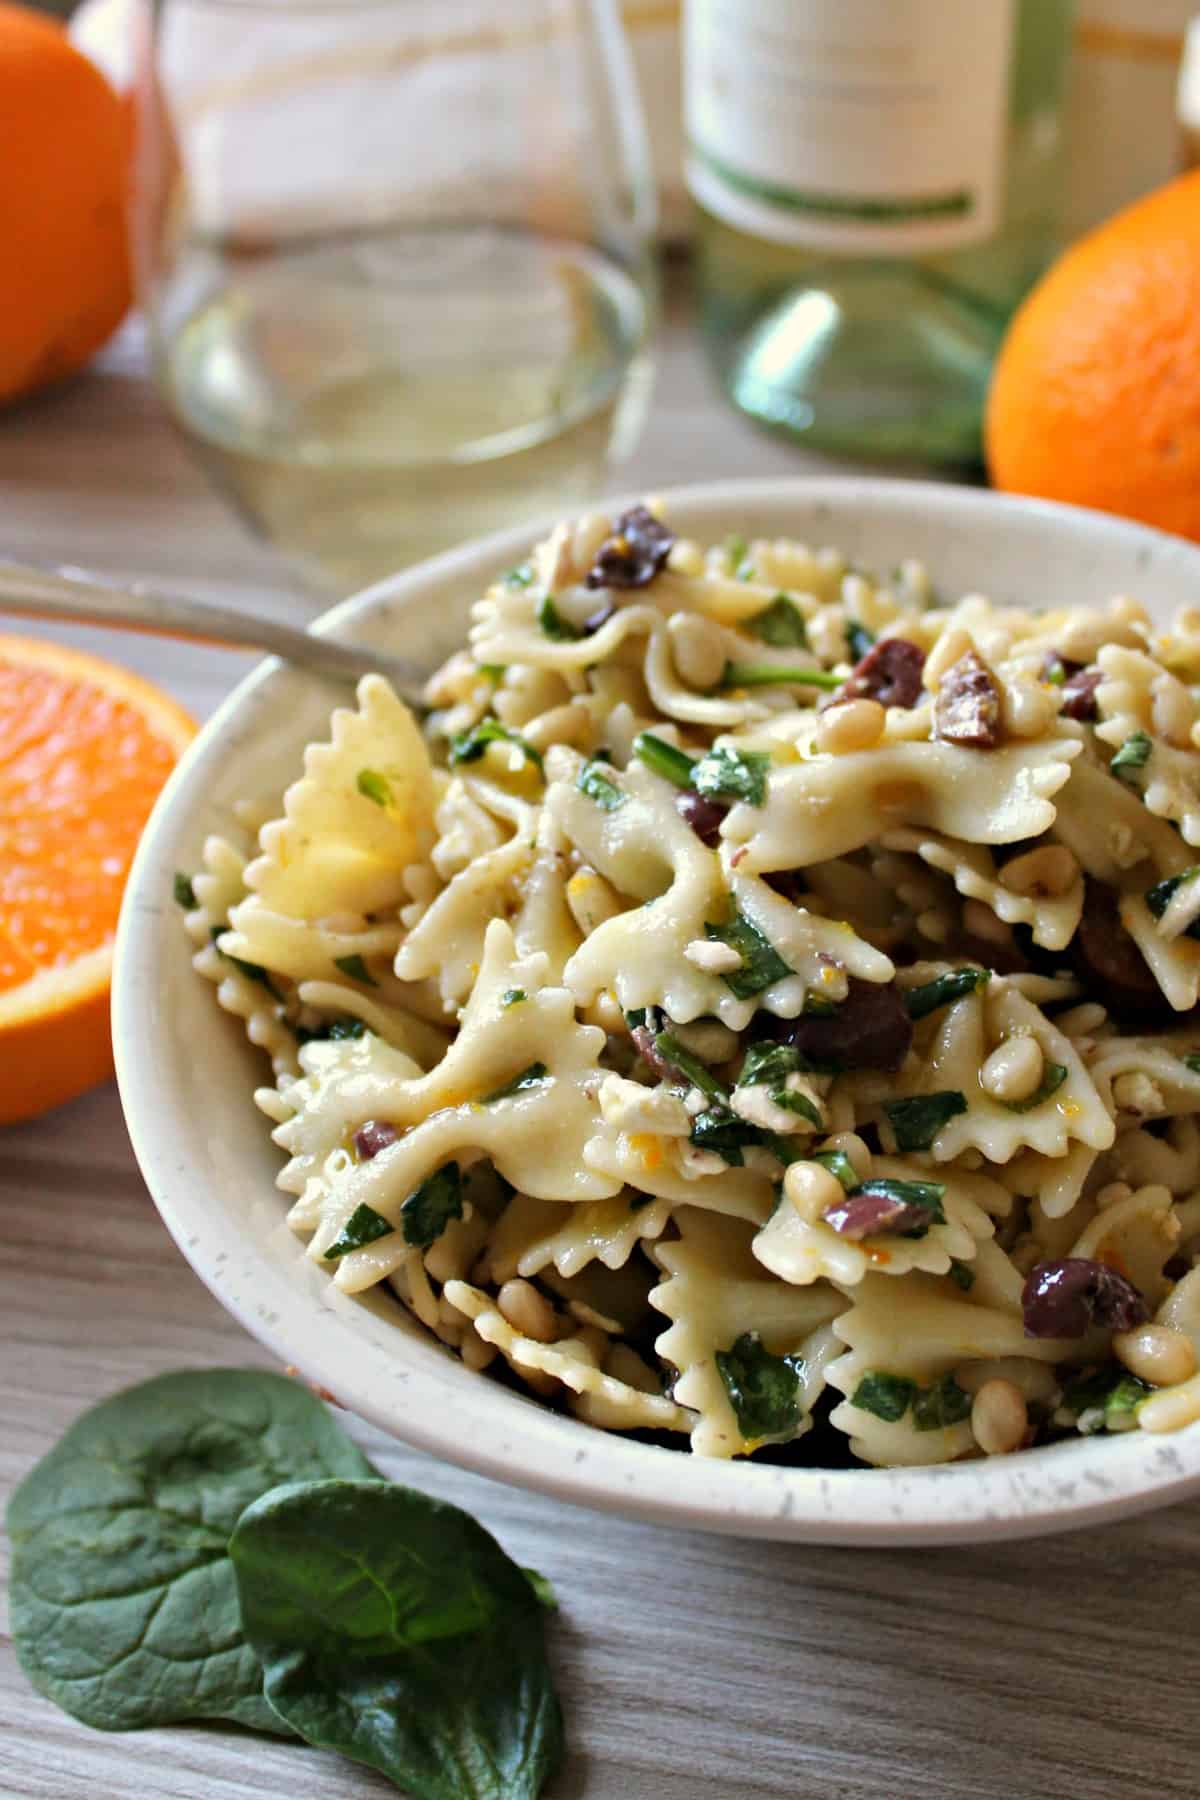 Citrusy Spinach, Olive, Feta & Pine Nut Pasta Salad is an ideal dish for laid back summer entertaining. Not only does it come together quickly, but it's also a great recipe to make ahead so you an focus on the best part of summertime: relaxing! Pair with light, refreshing Cavit Pinot Grigio for effortless elegance. 